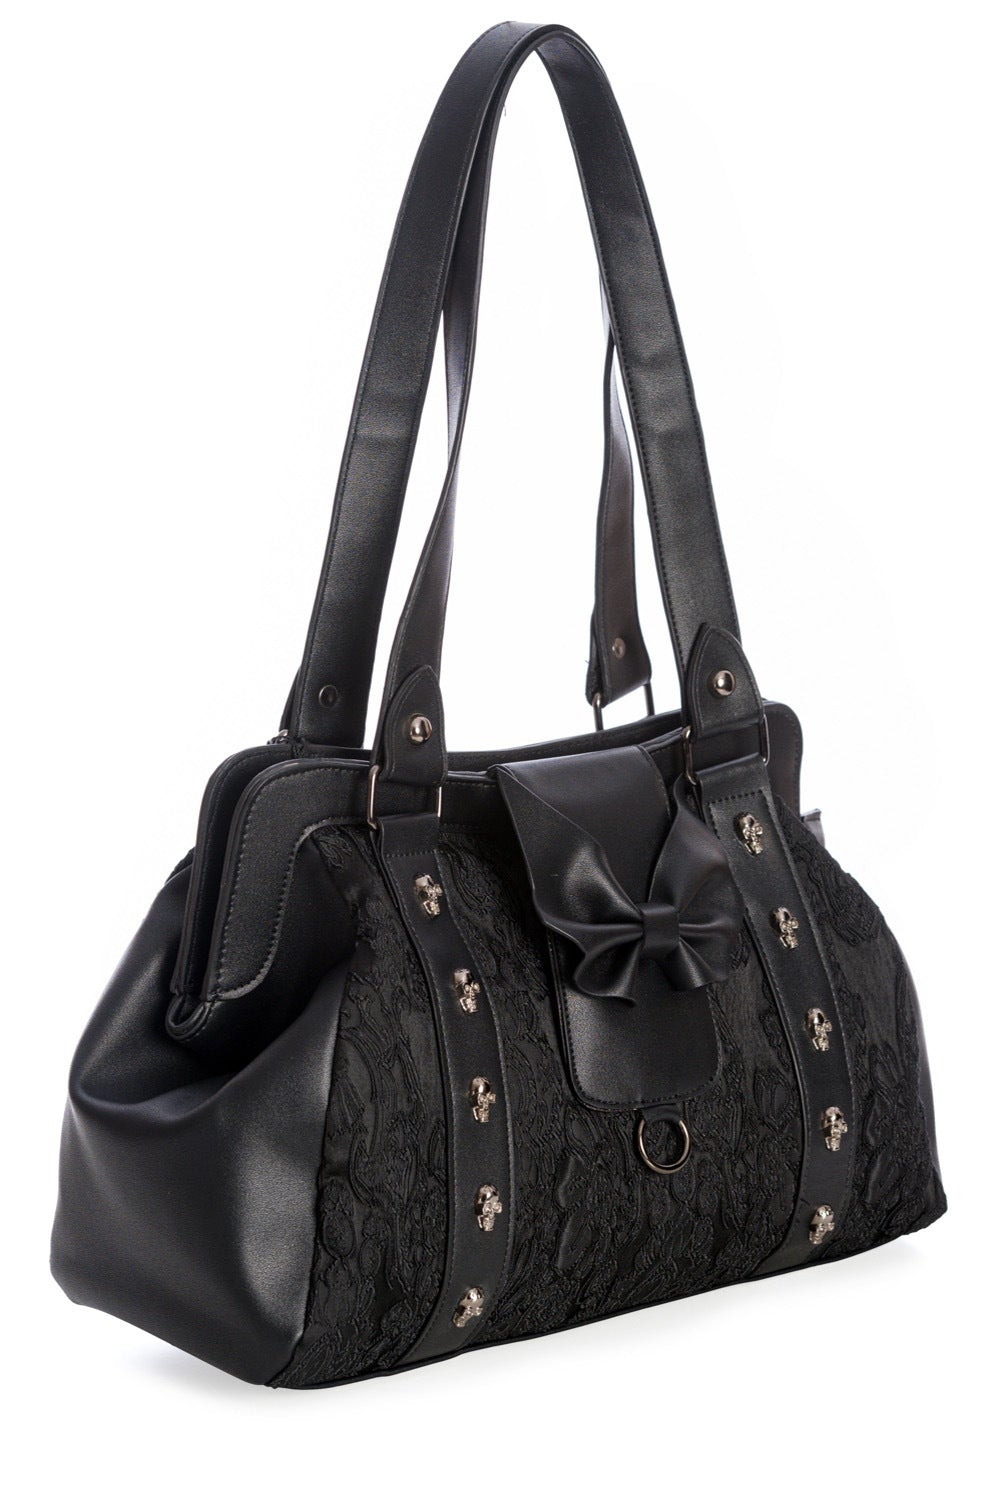 Black shoulder bag with skull studs, lace features and black matte bow. 